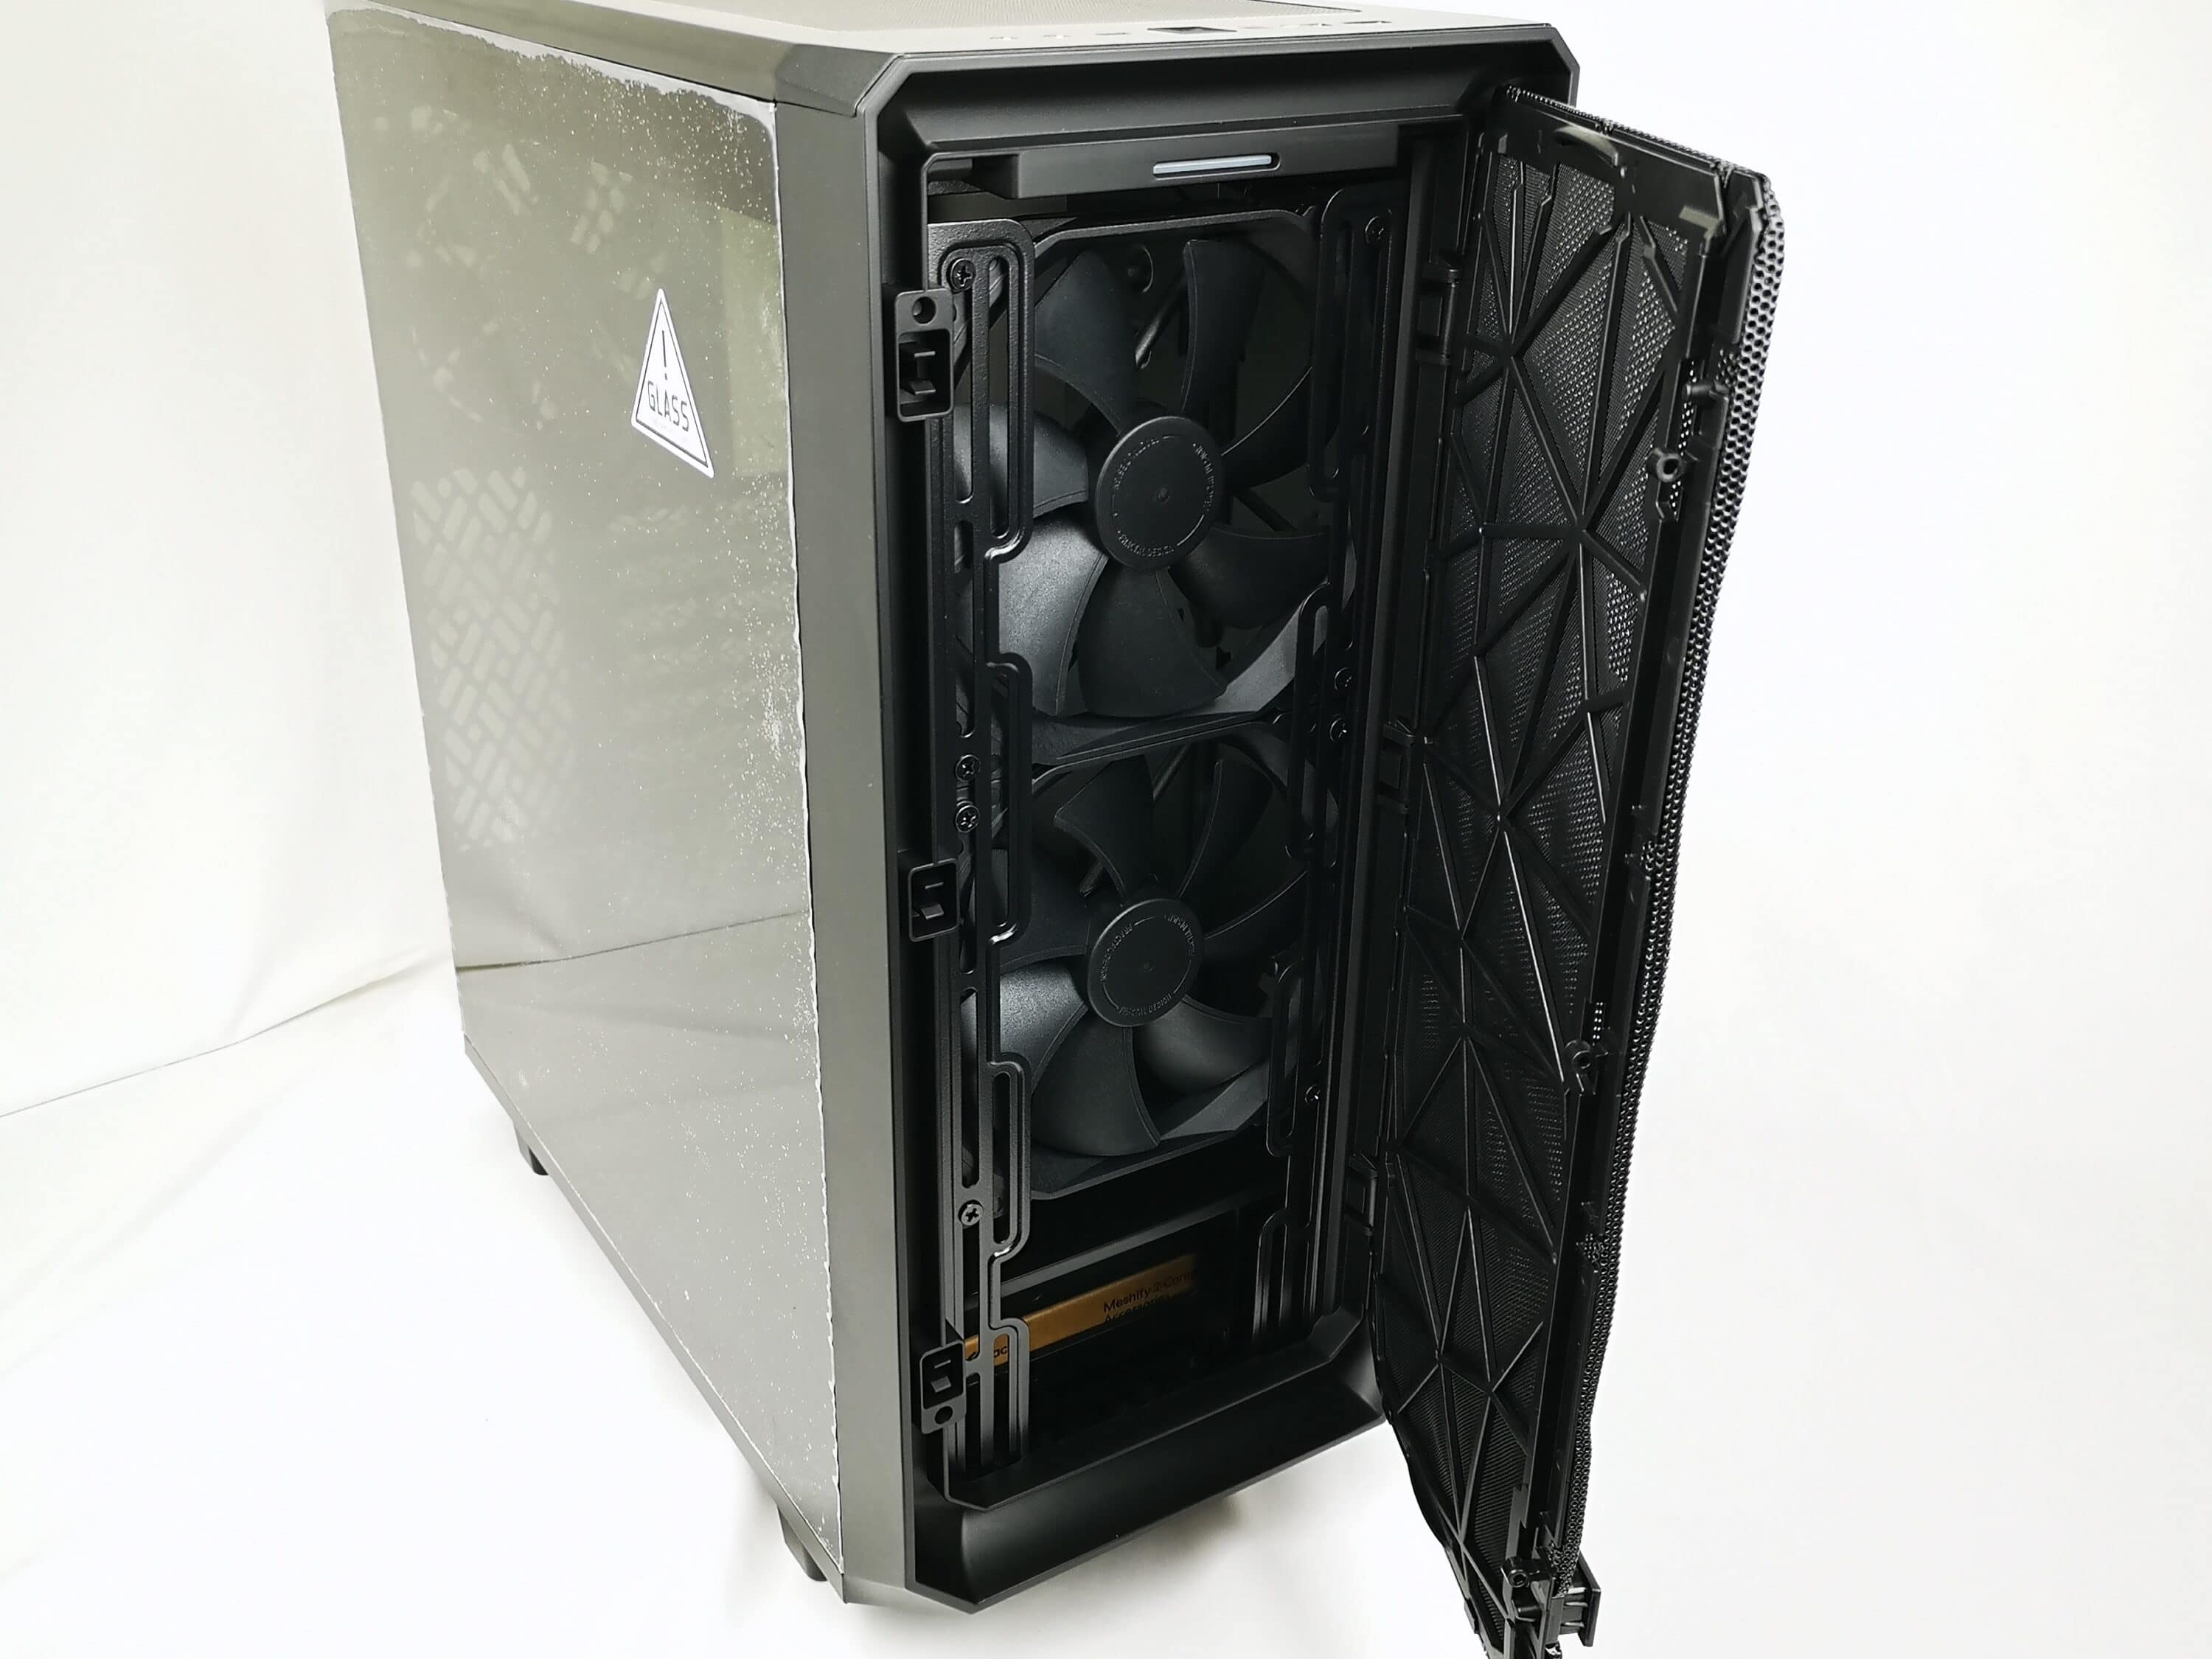 Fractal Design Meshify 2 Compact - The compact sequel to a classic